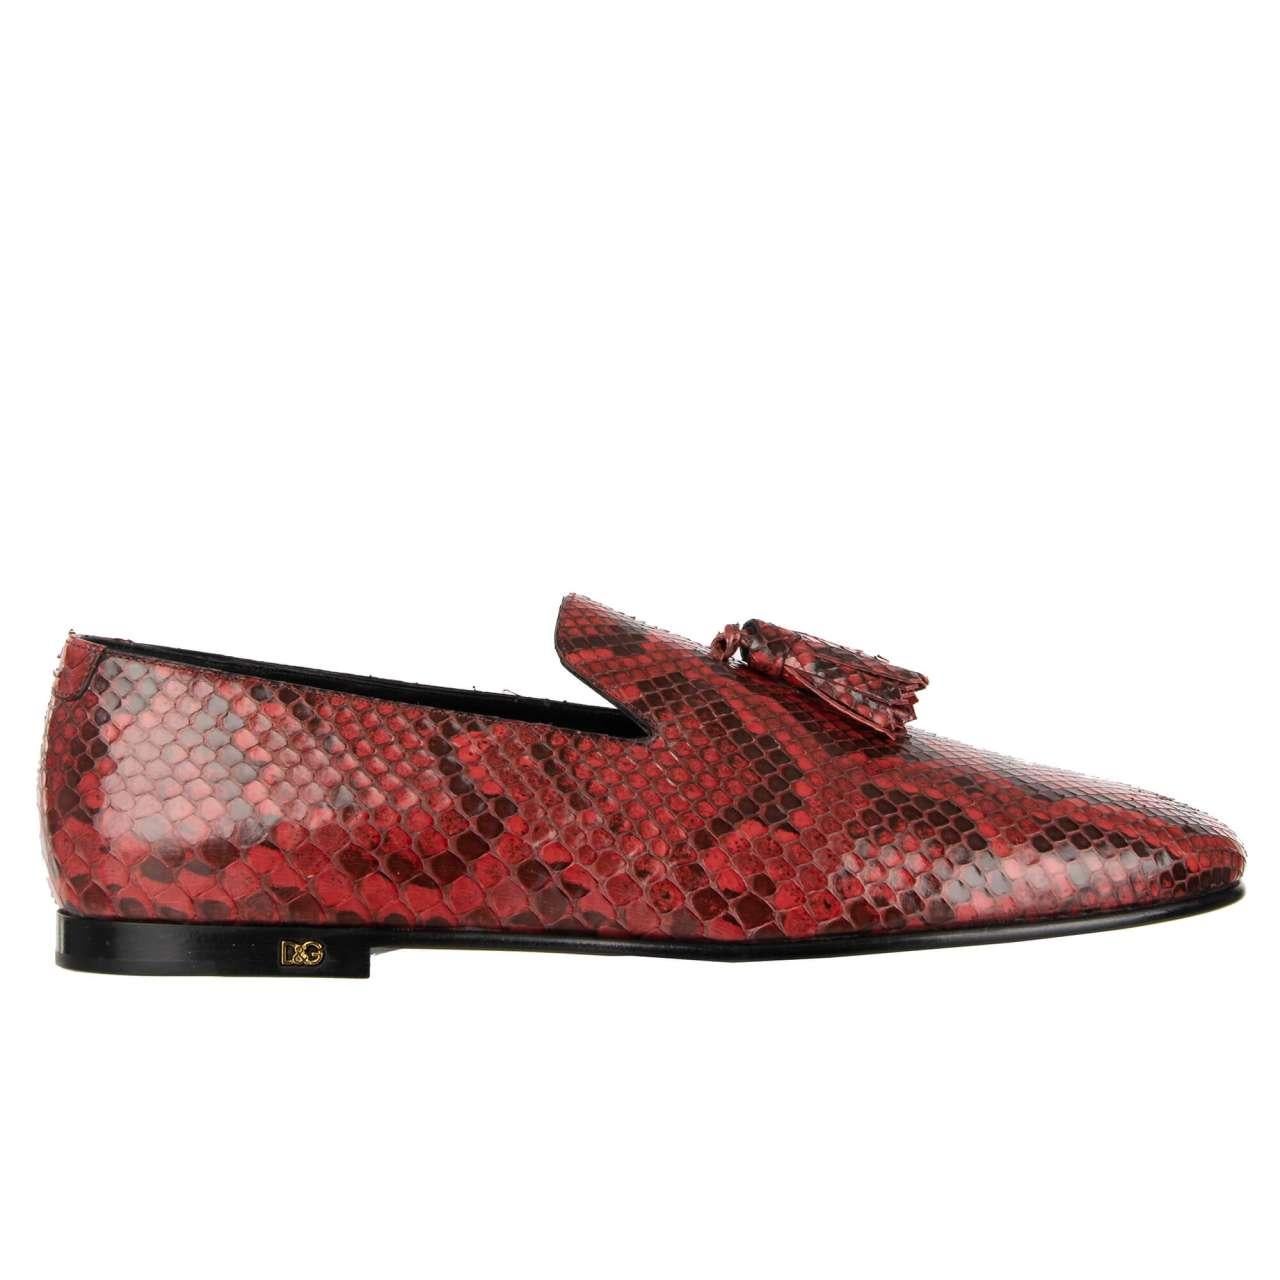 Dolce & Gabbana Snake Tassel Shoes Loafer YOUNG POPE Red 44 UK 10 US 11 For Sale 3